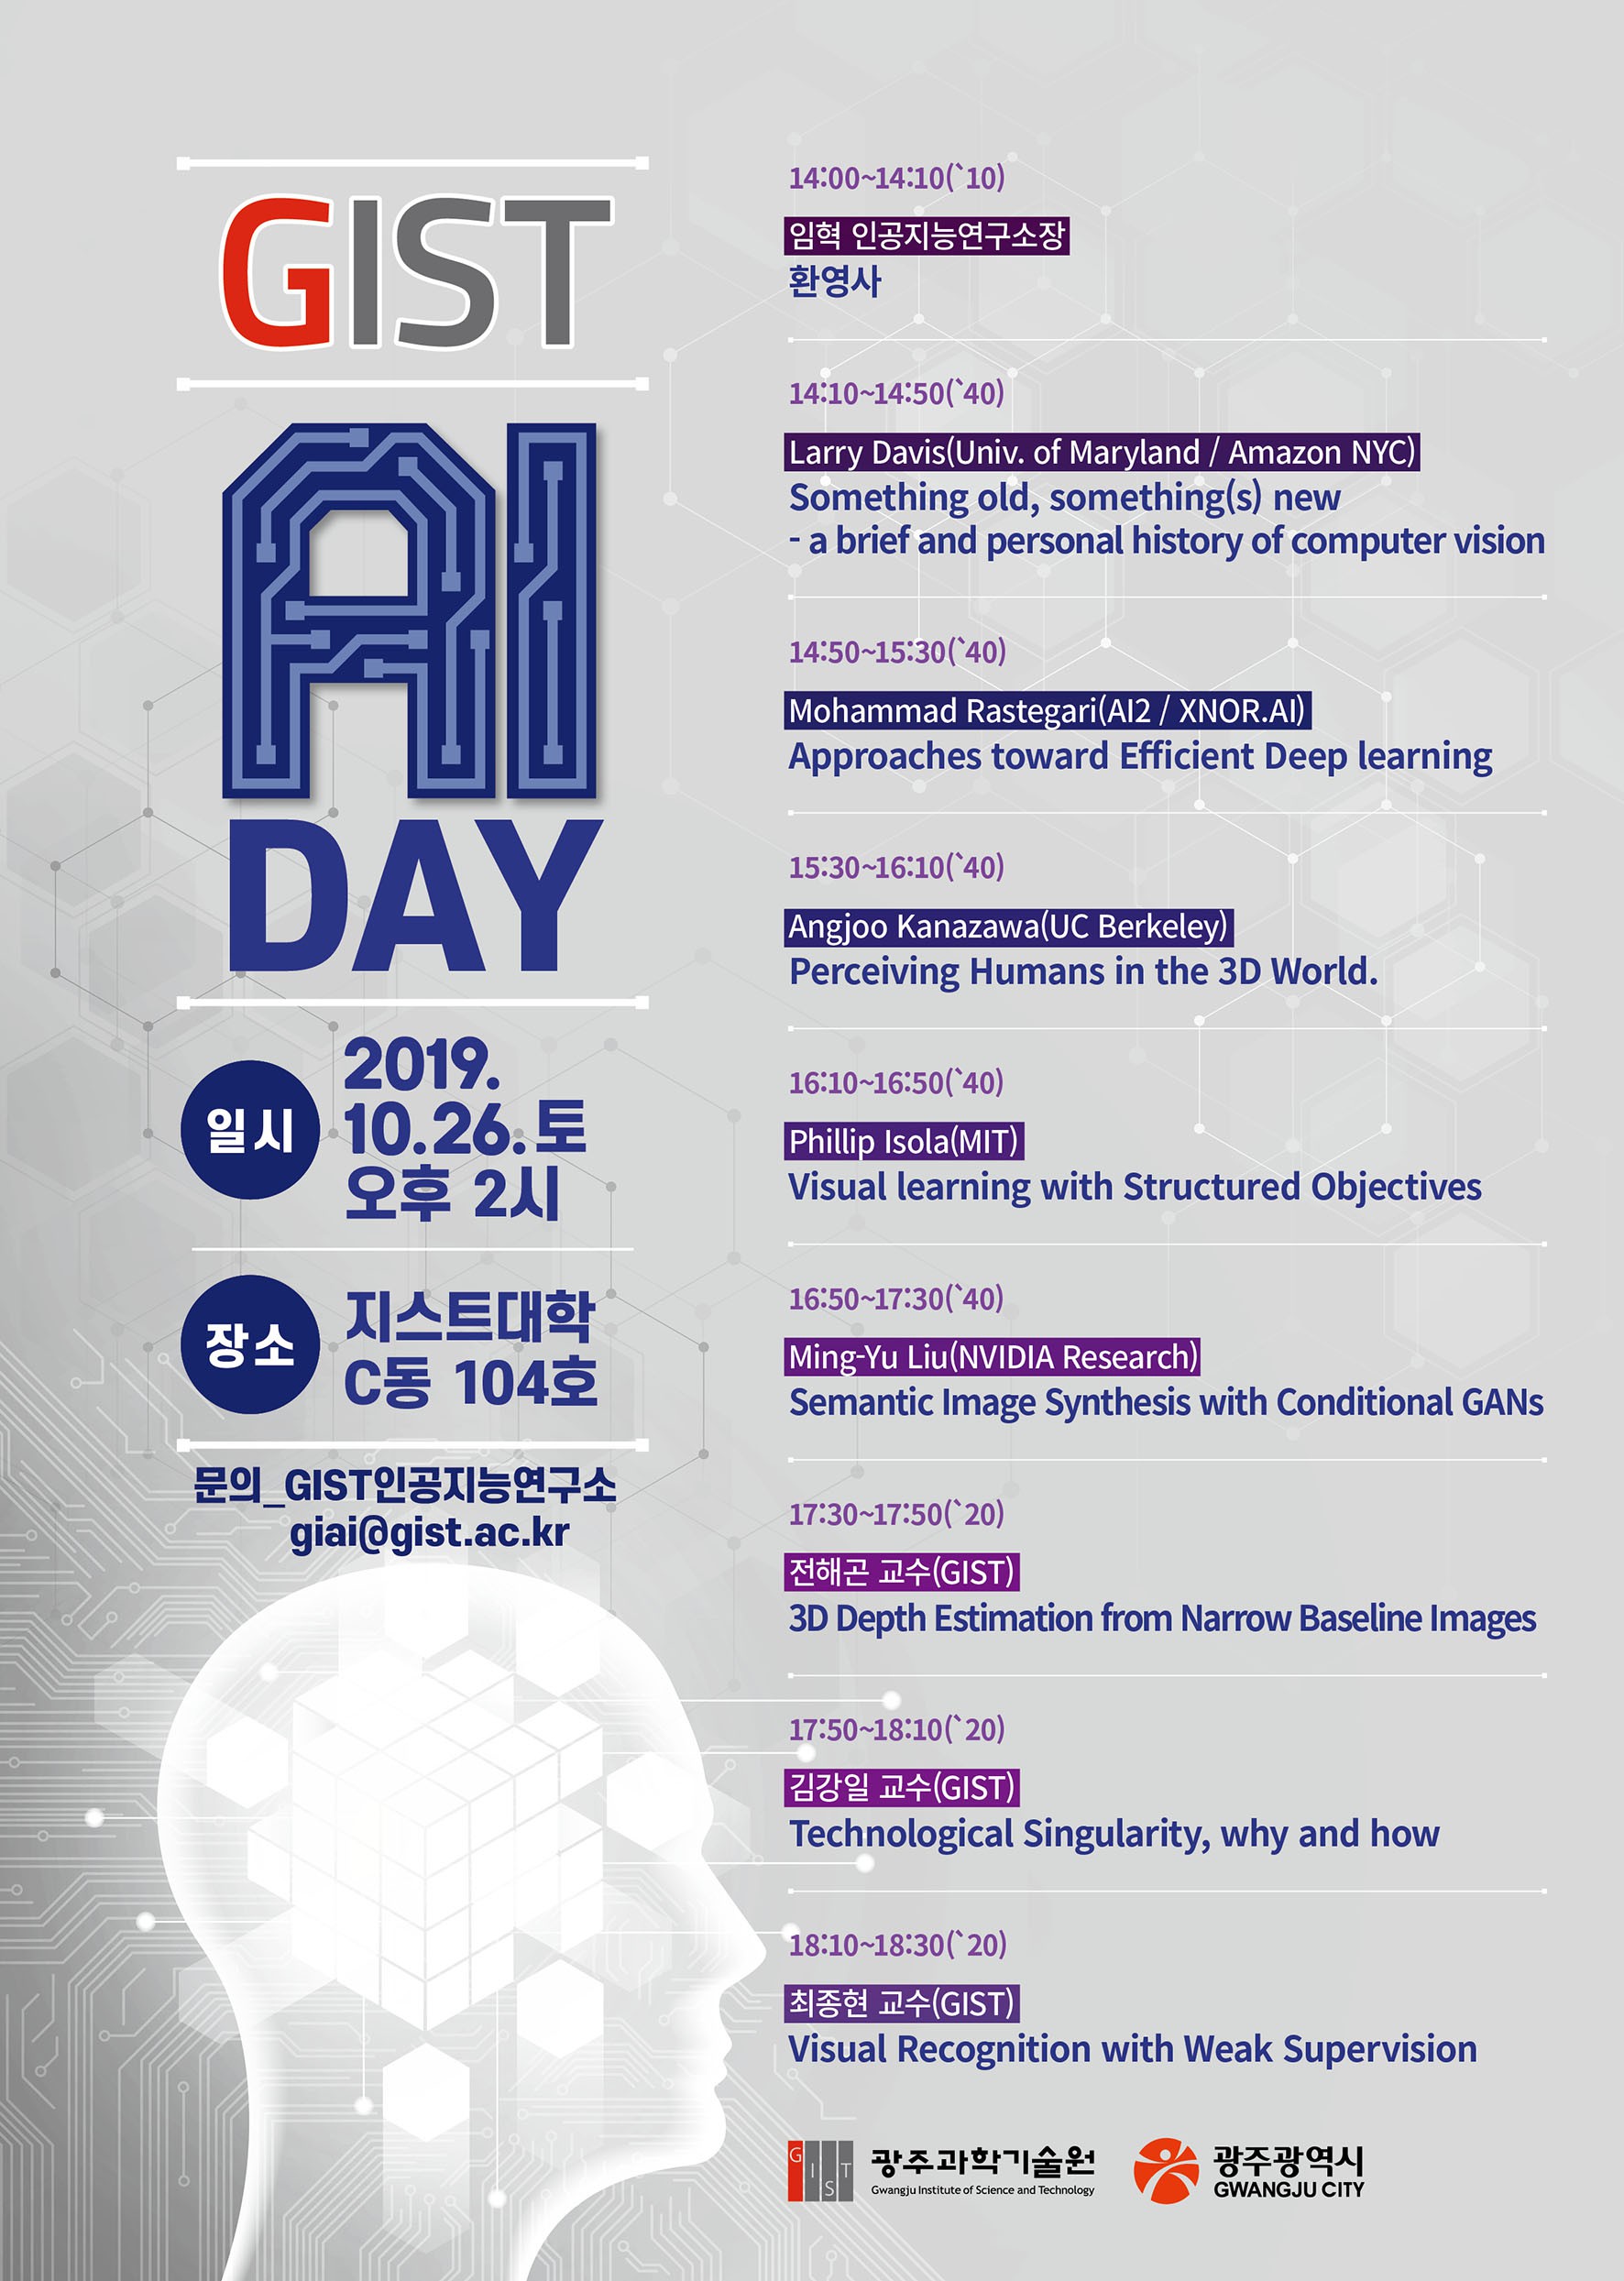 GIST to host AI DAY (International Conference on Artificial Intelligence) 이미지